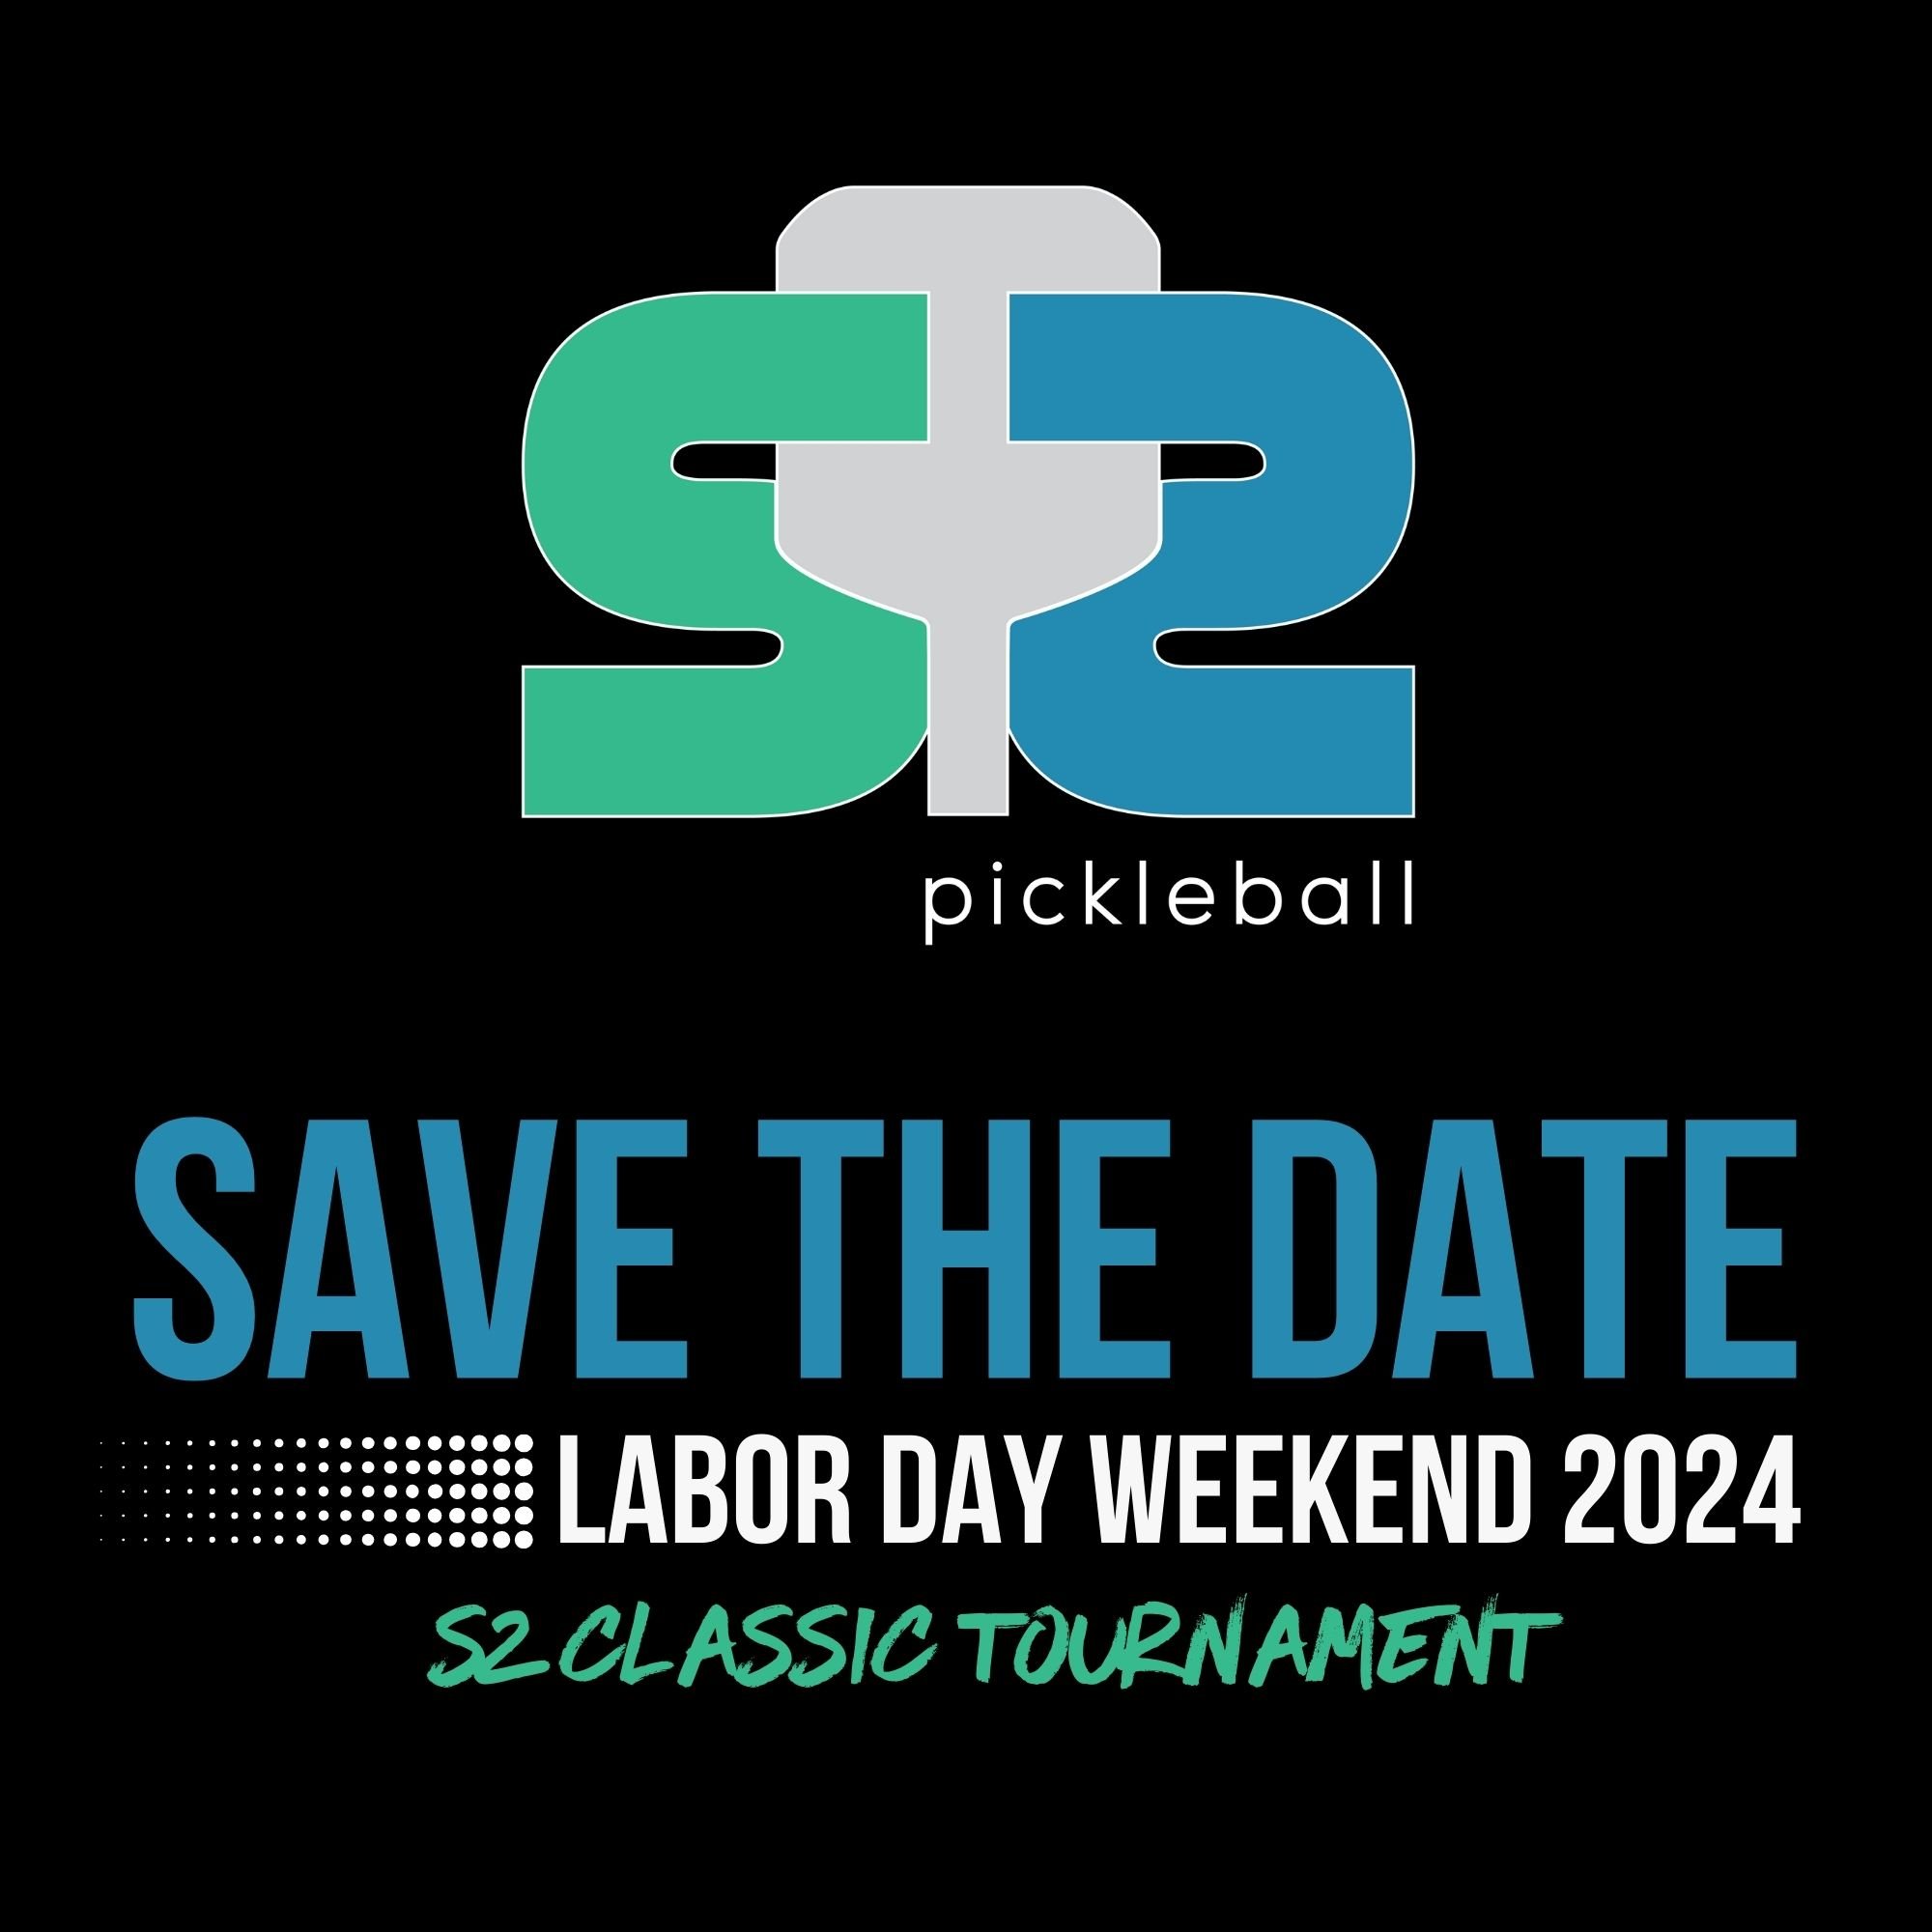 We know Labor Day is a LONG time away but we hope you'll SAVE THE DATE and join us for the inaugural S2 CLASSIC Labor Day Weekend Team Tournament! We'll kick it off Saturday, August 31st and go to Monday September 2nd.